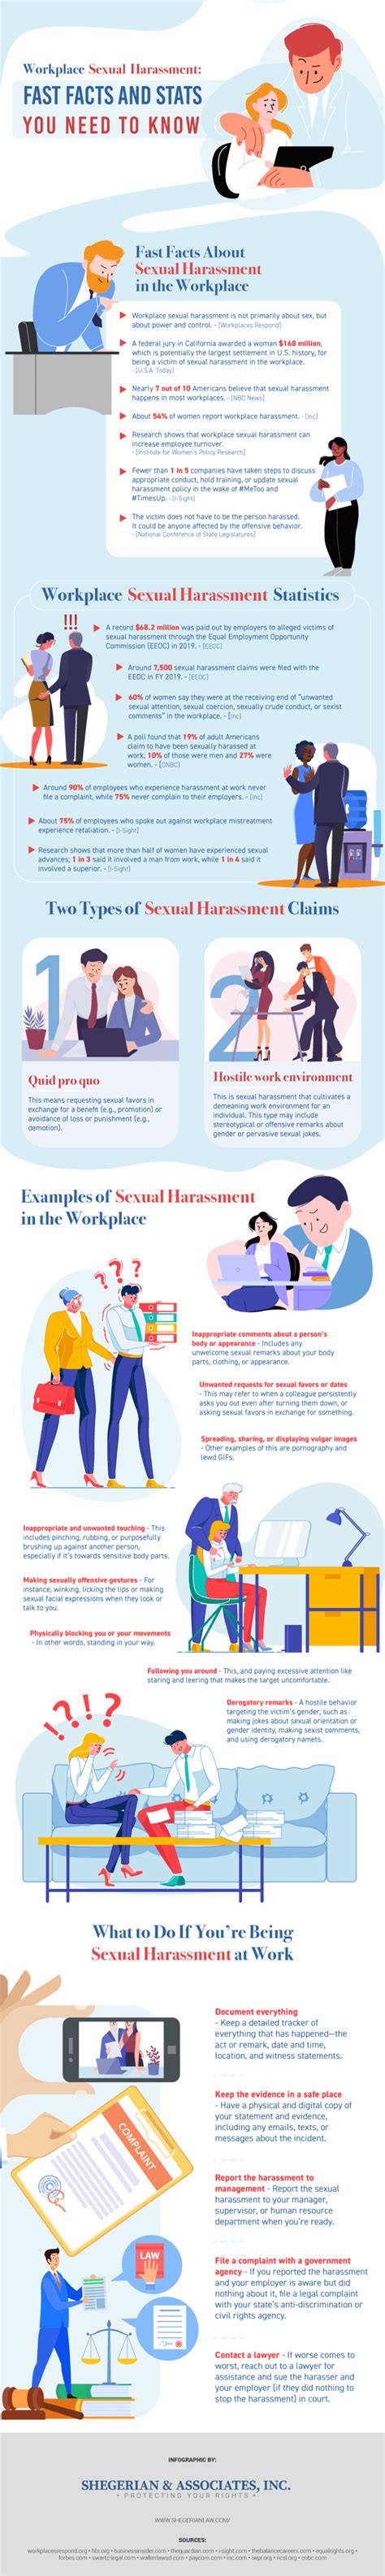 Workplace Sexual Harassment Fast Facts And Stats You Need To Know E Learning Infographics